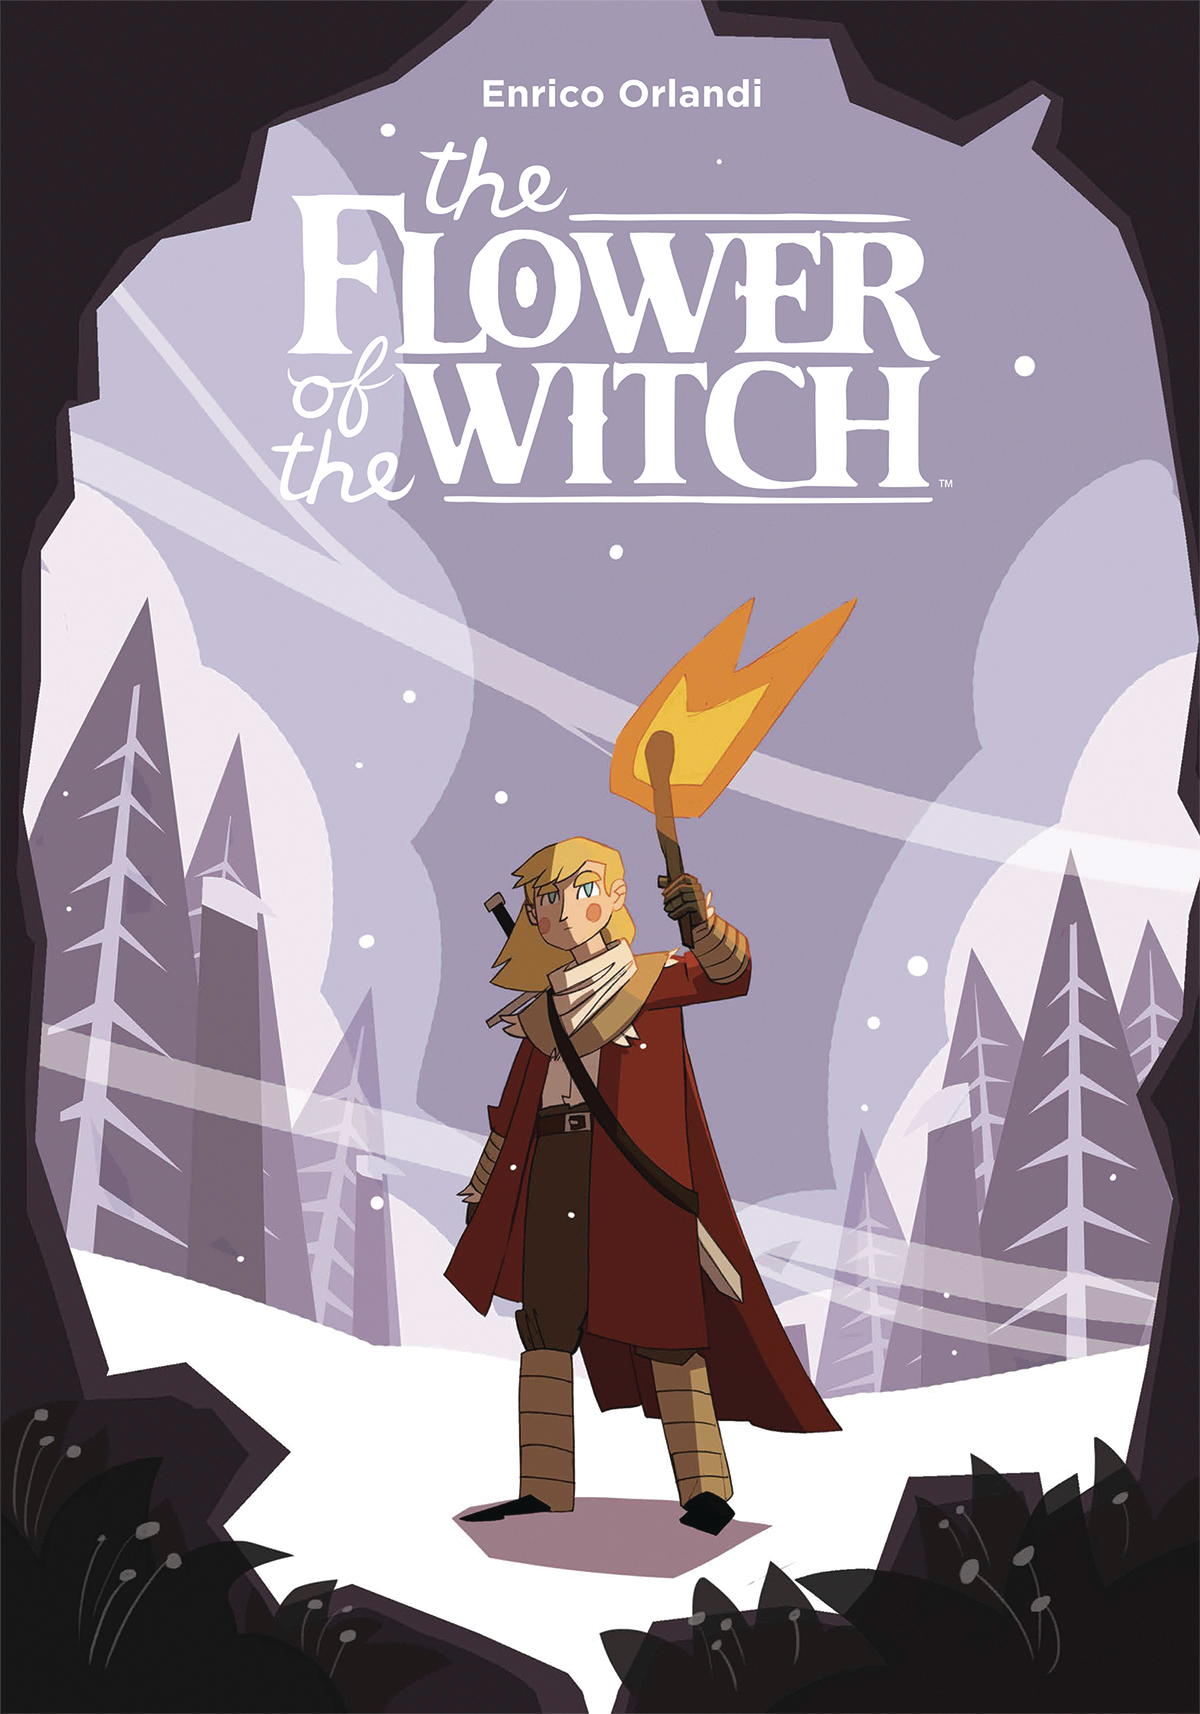 Flower of the Witch Graphic Novel